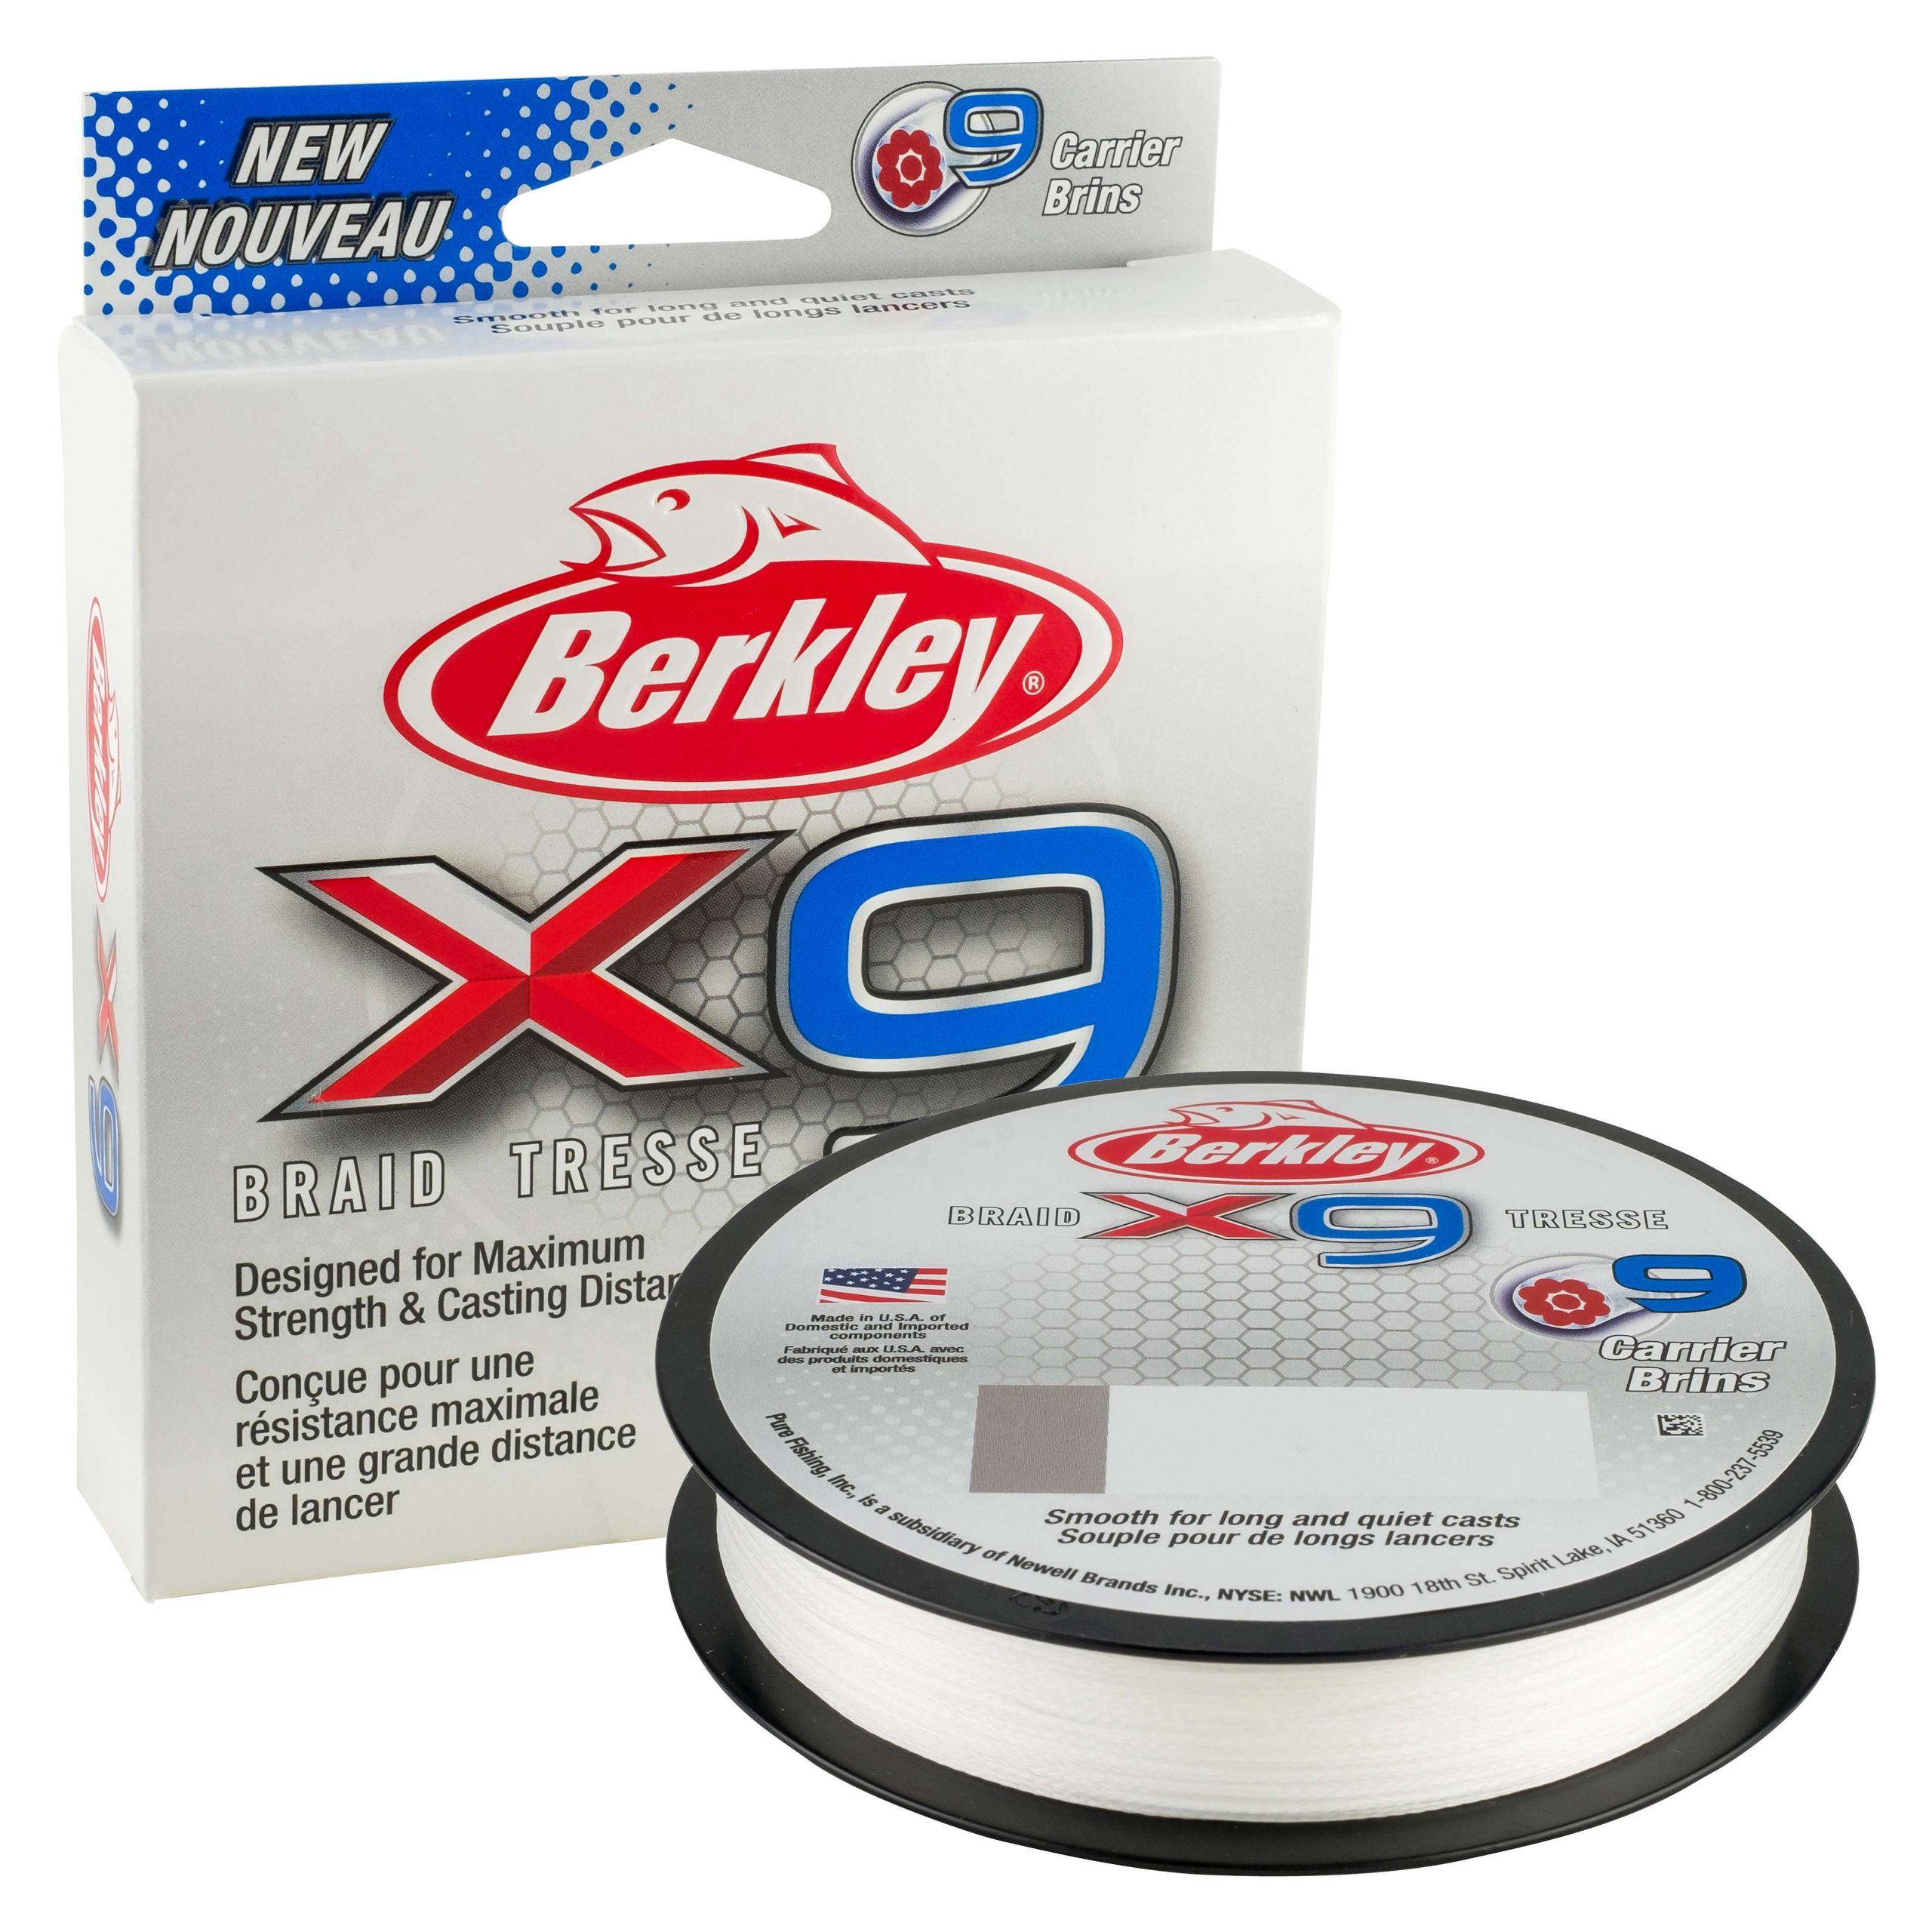 X9 Braid<BR>
Berkley<BR>
$17.99/165 yd. spool<BR>
Strength and reliability play an important role in selecting a braided line, which is why many anglers typically use braided lines comprised of either four or eight strands. The new Berkley x5 and x9 braided lines take strength and reliability to the next level by adding another strand, respectively, all while keeping the same diameter as traditional four- and eight-carrier braids. Available in 8-100 lb. test. 